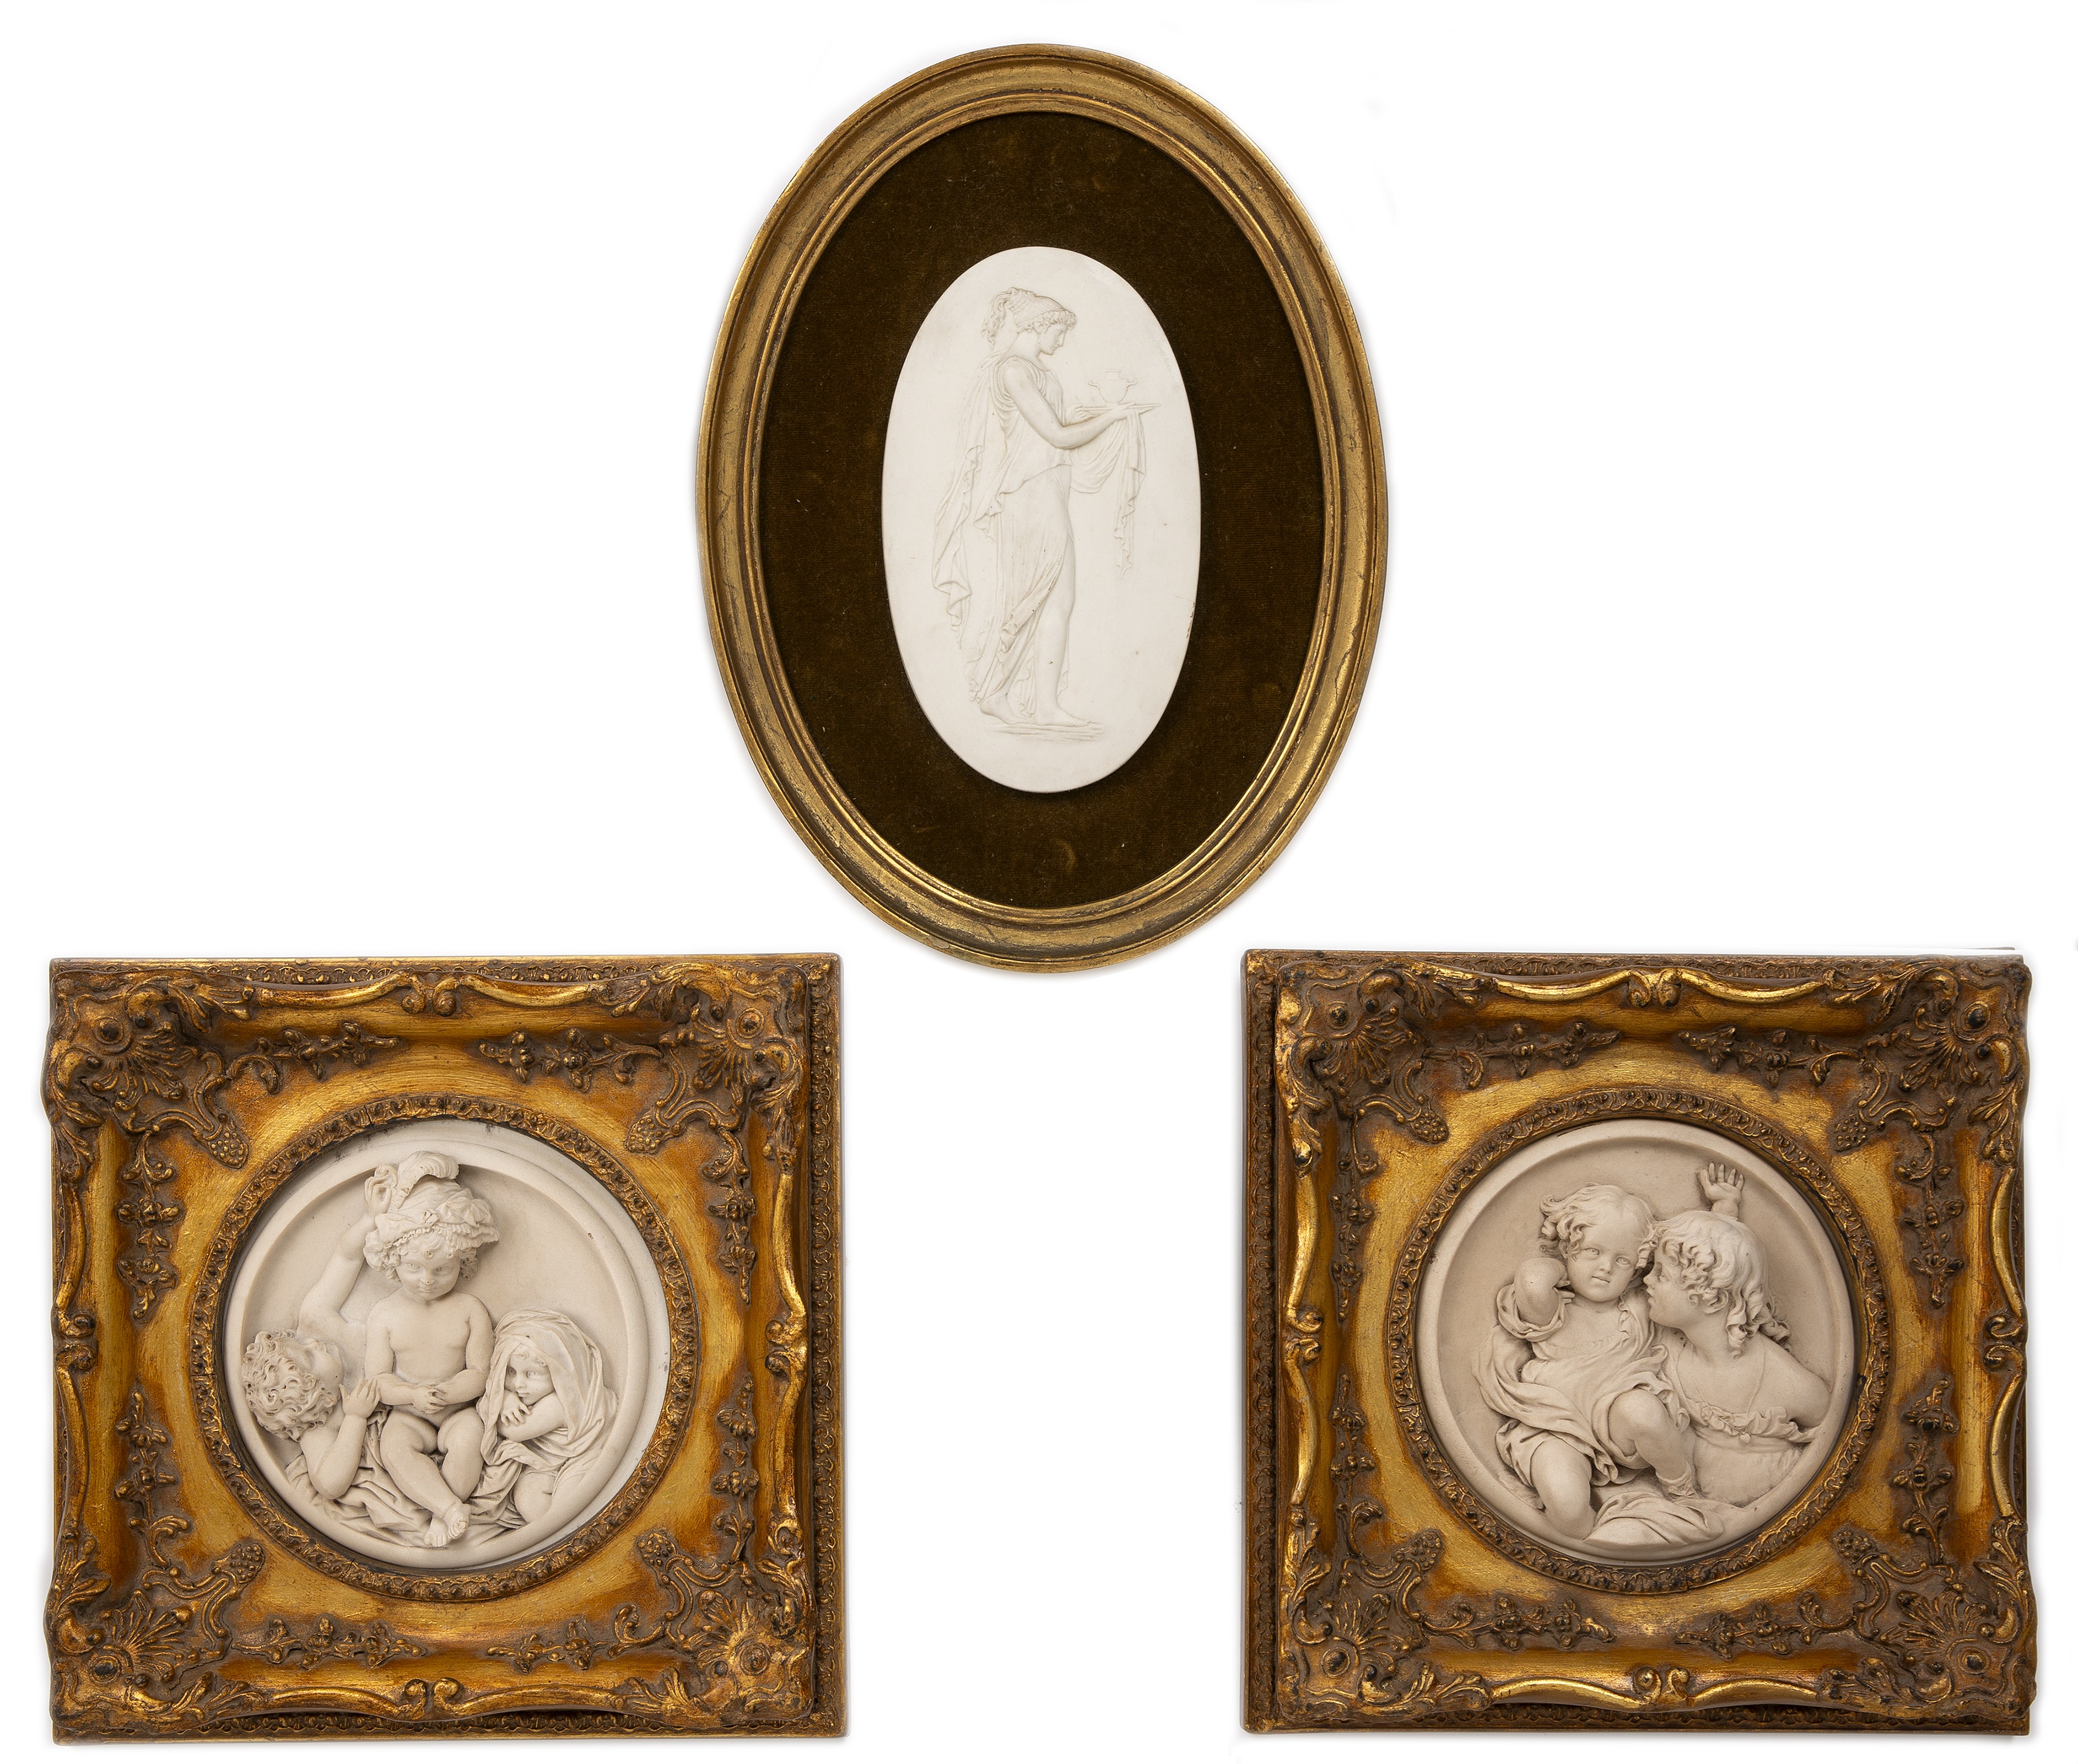 A Sevres porcelain oval classical plaque, 21cm x 12.5cm; together with a pair of composite reliefs